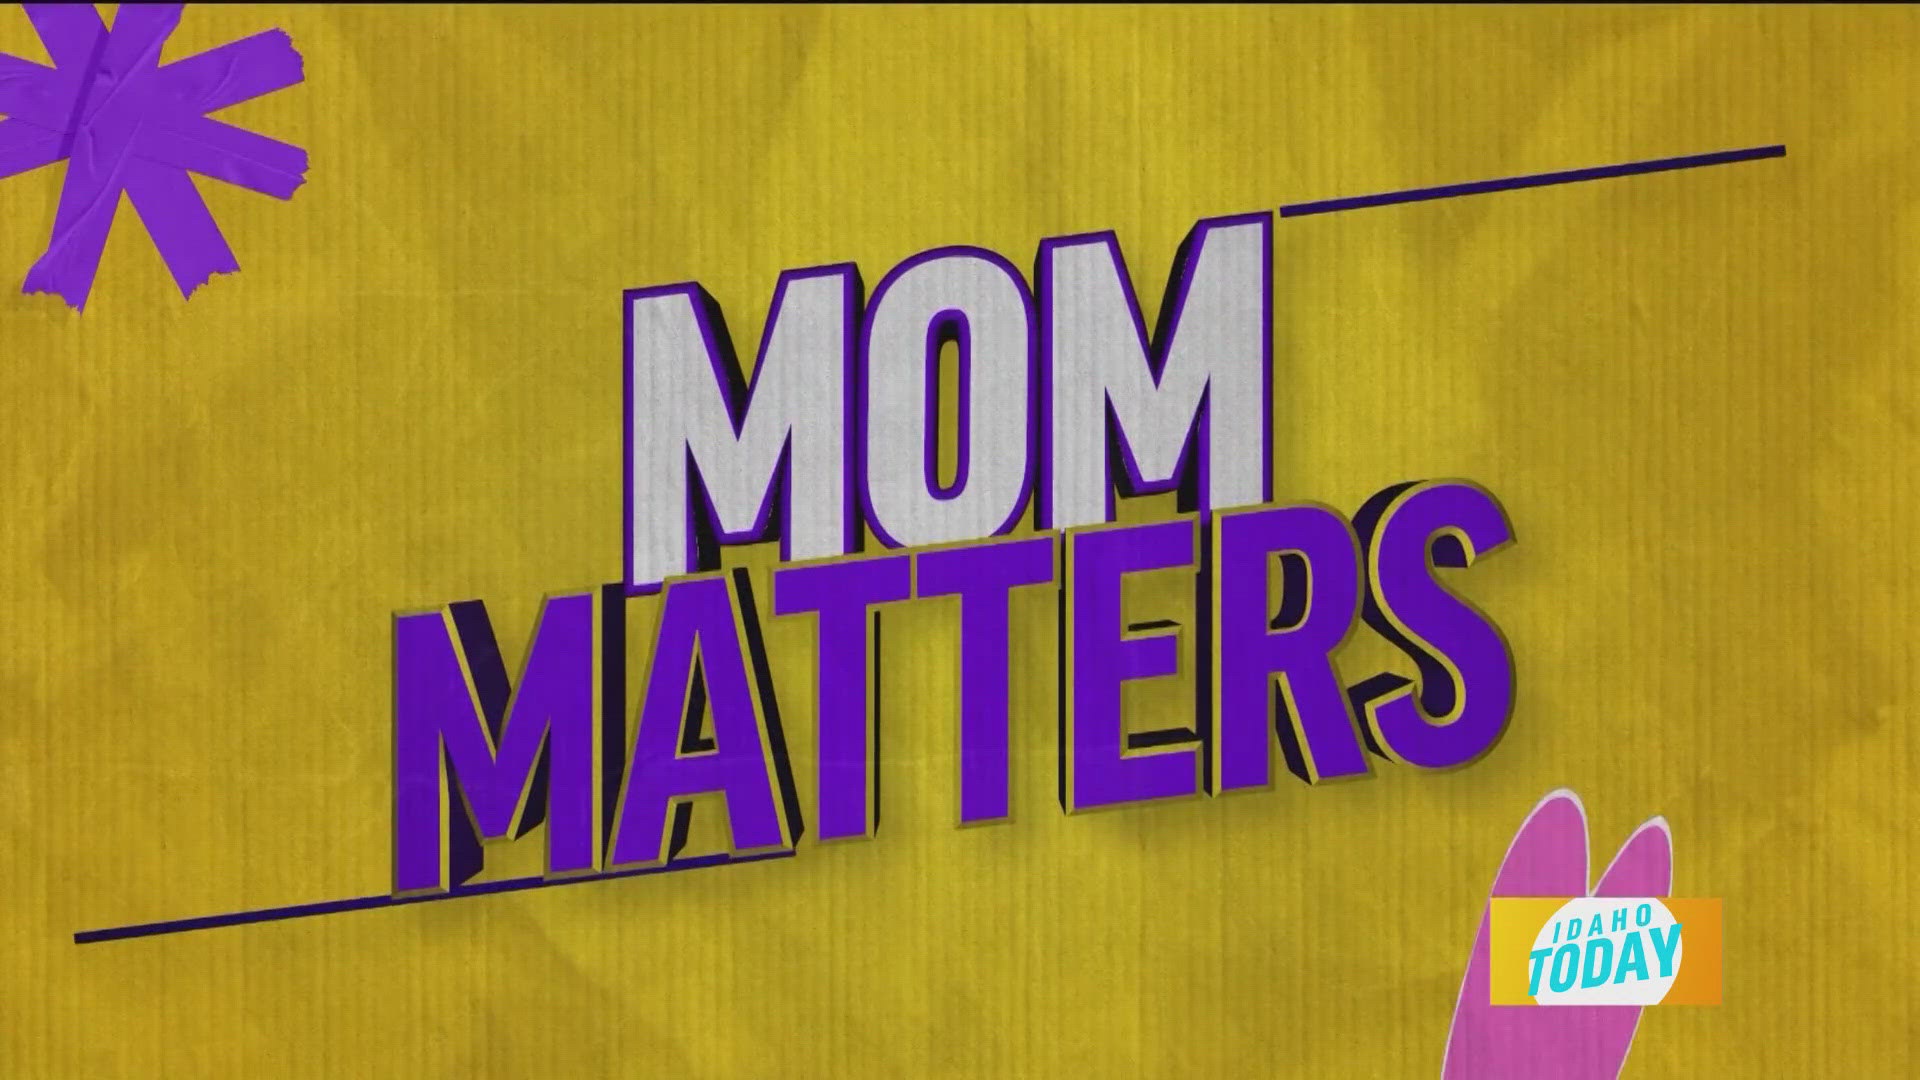 This week on Mom Matters, the panel discusses the need for better work options.